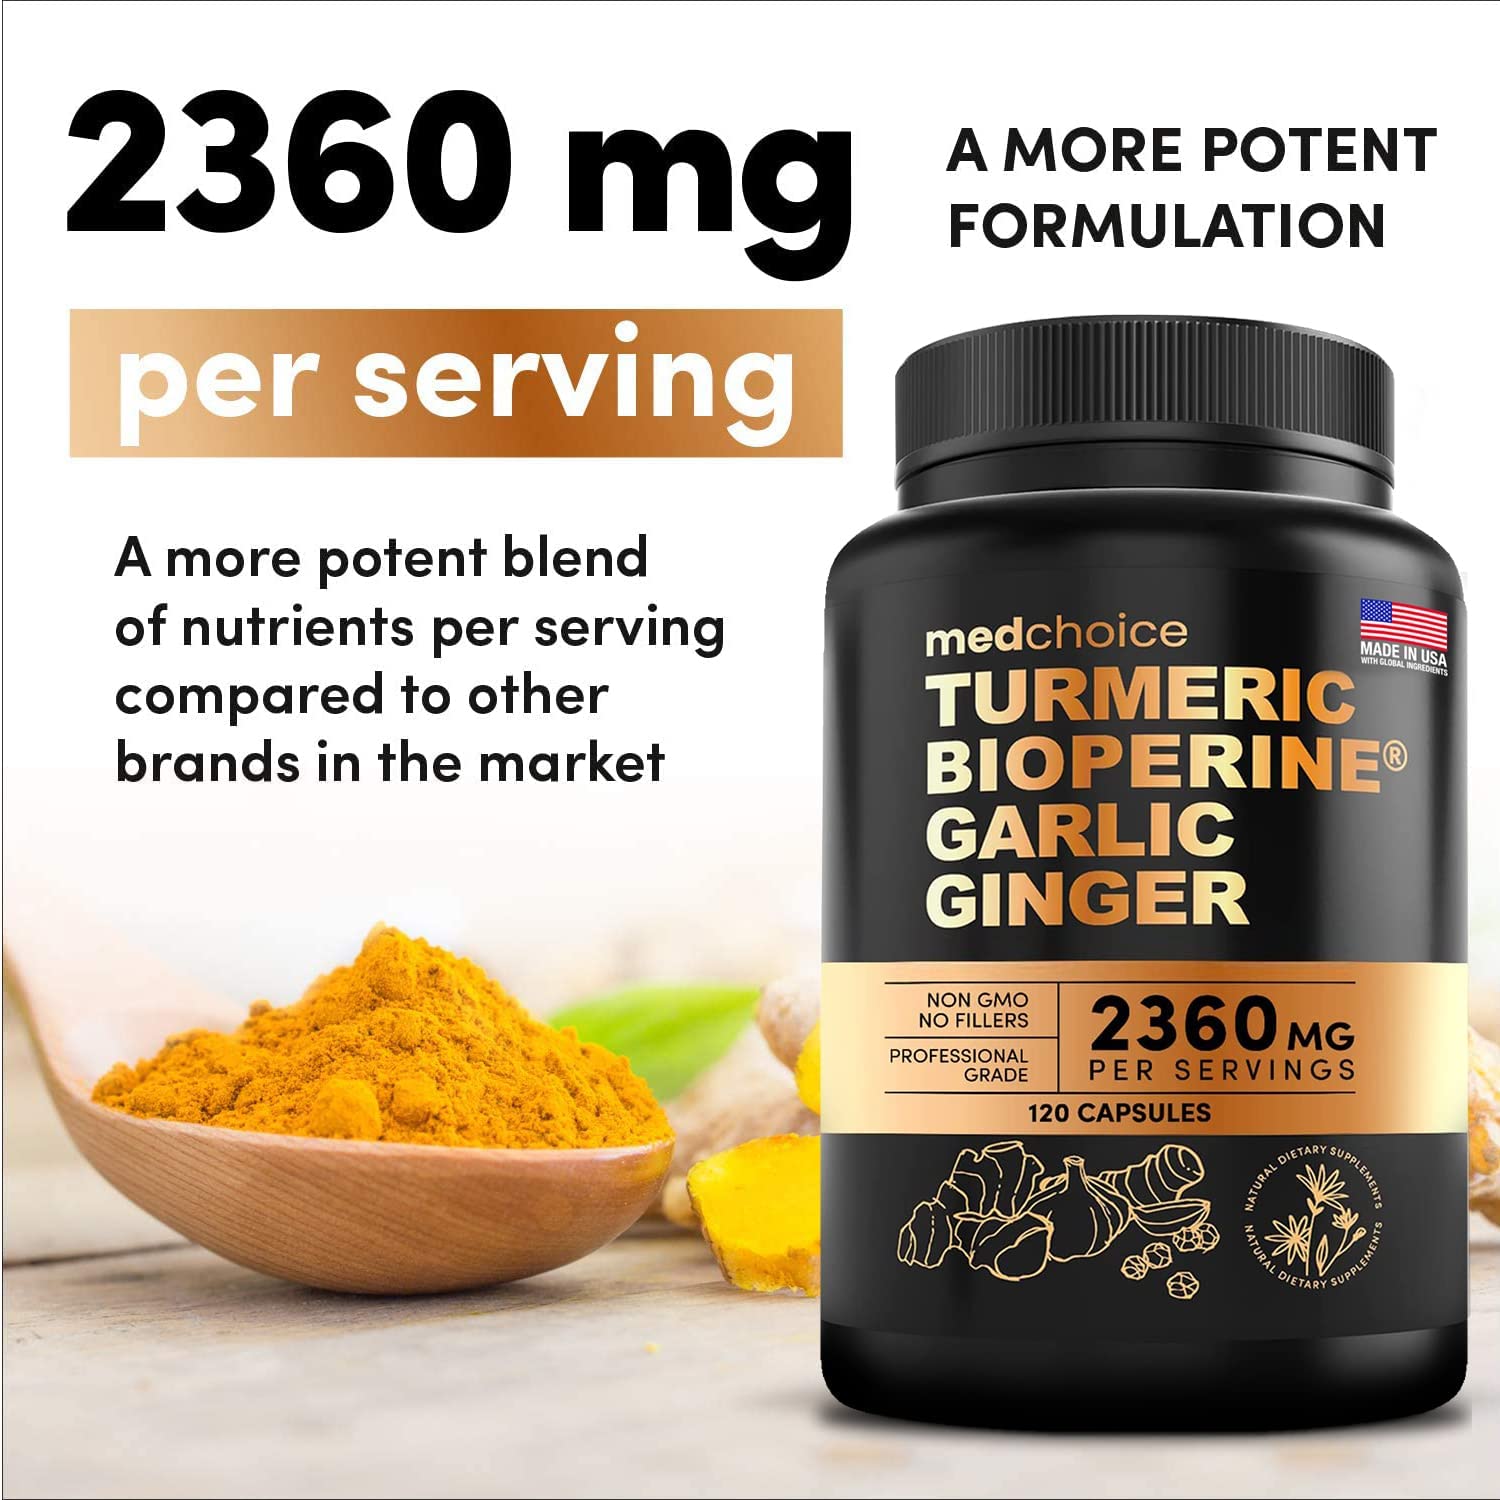 MEDCHOICE Turmeric & Ginger (120ct) and Nootropic Brain (60ct) Supplement Bundle - Wellness Duo for Joint, Digestion, Brain, & Mood Support - Vegan, Non-GMO, Gluten-Free